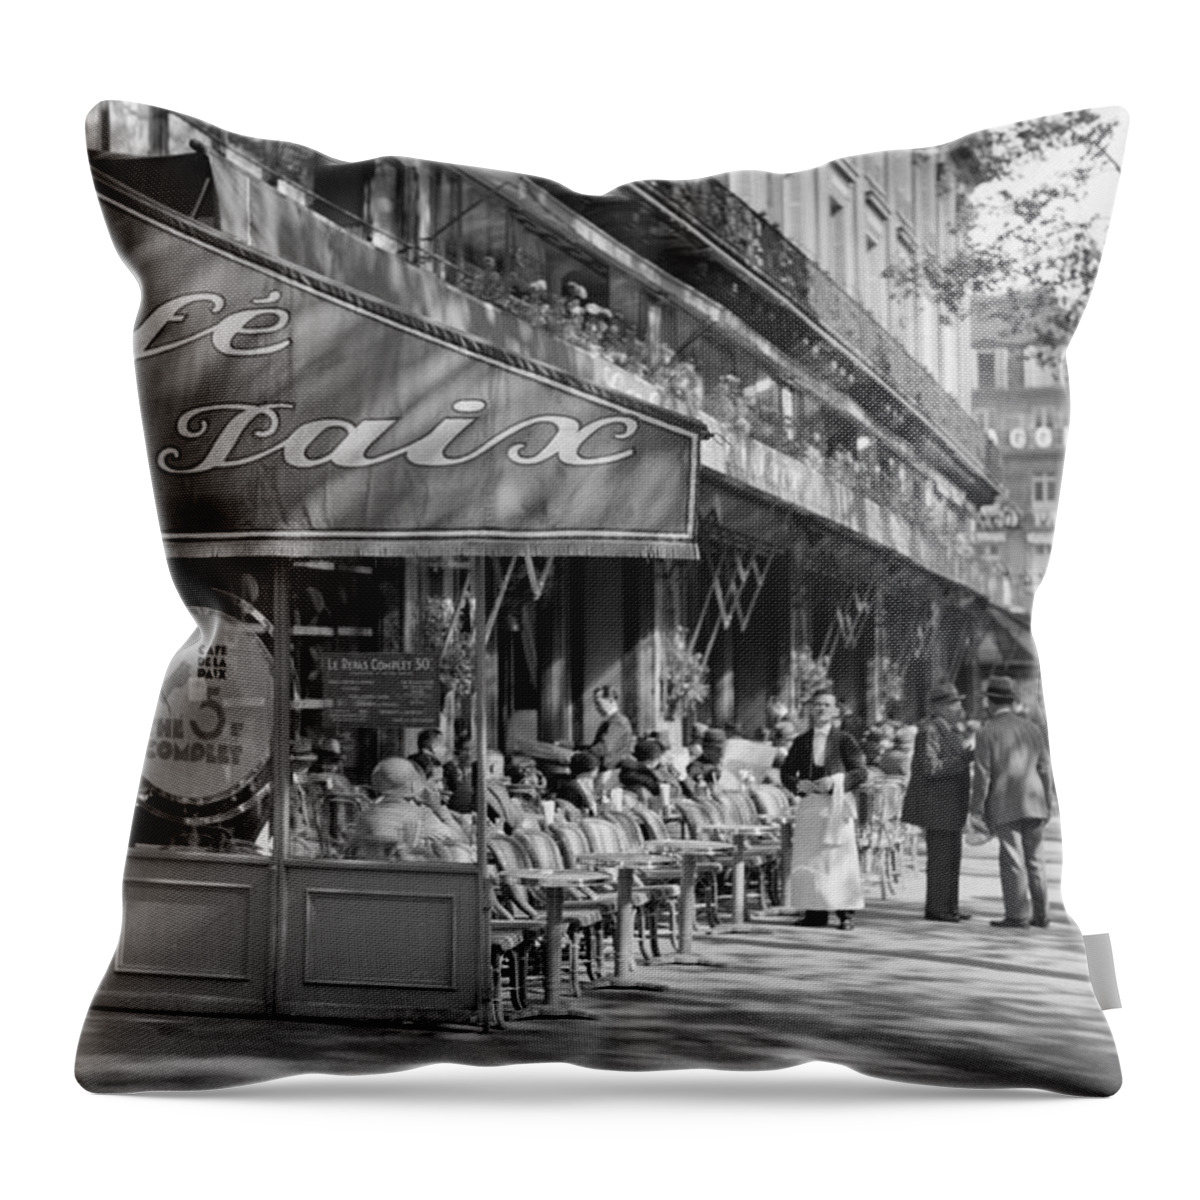 Paris Cafe Throw Pillow featuring the photograph Paris Cafe 1935 by Andrew Fare